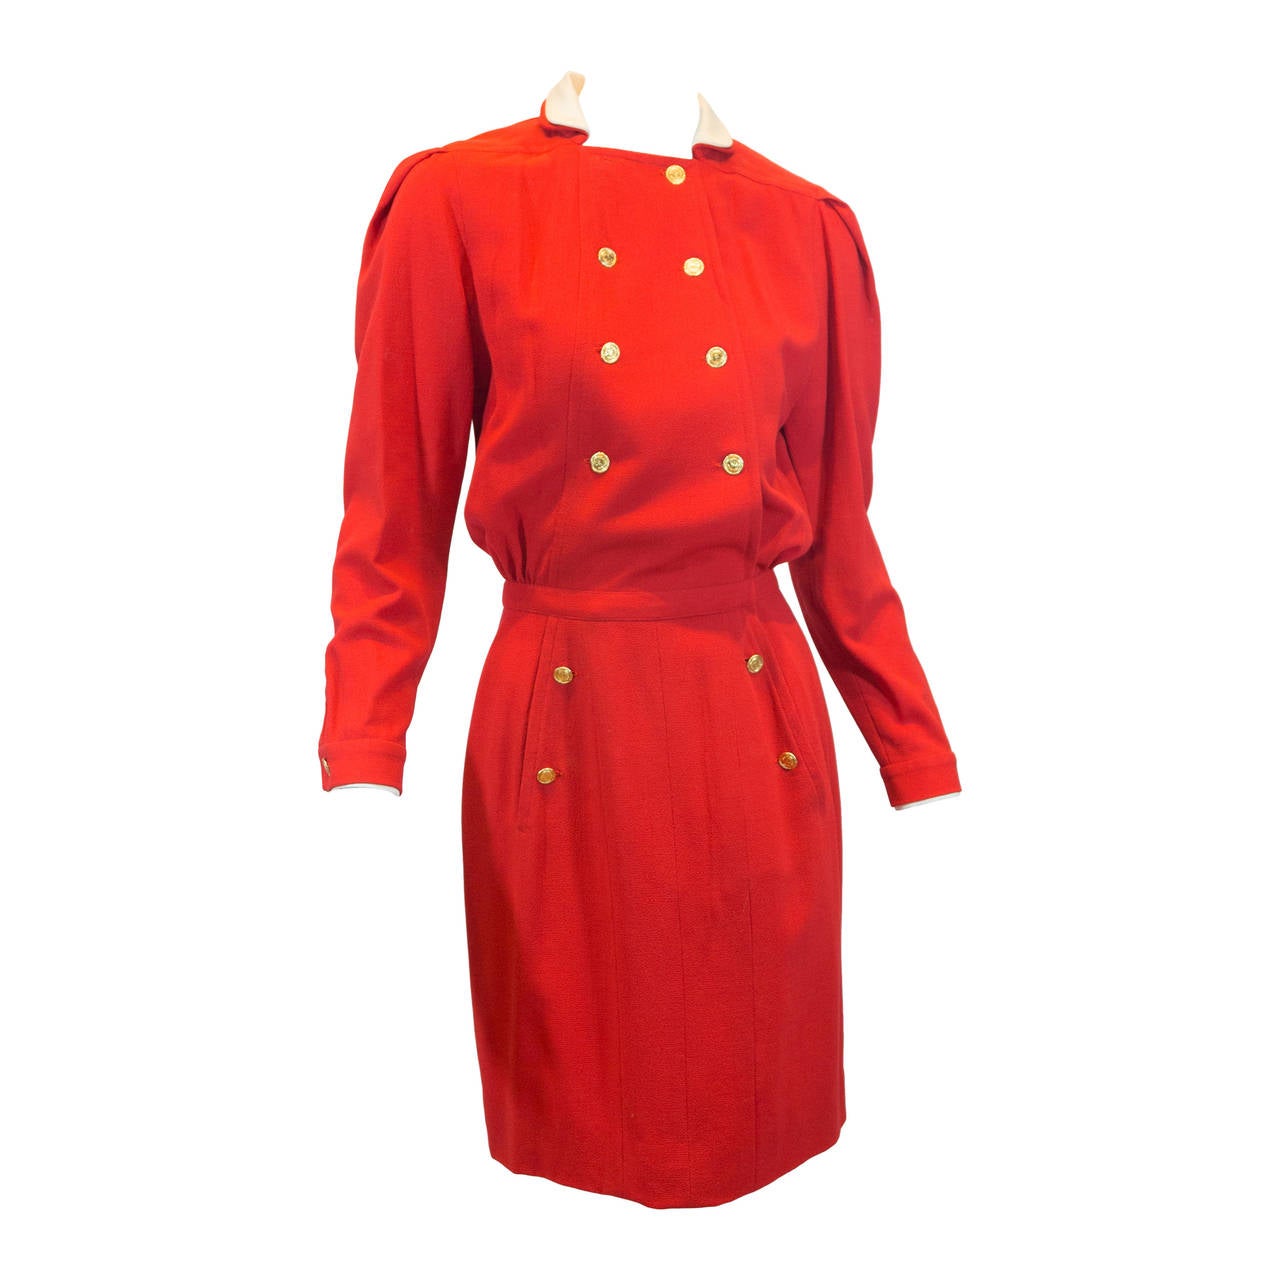 Chanel Vintage Red Dress with Gold Front Button Detail